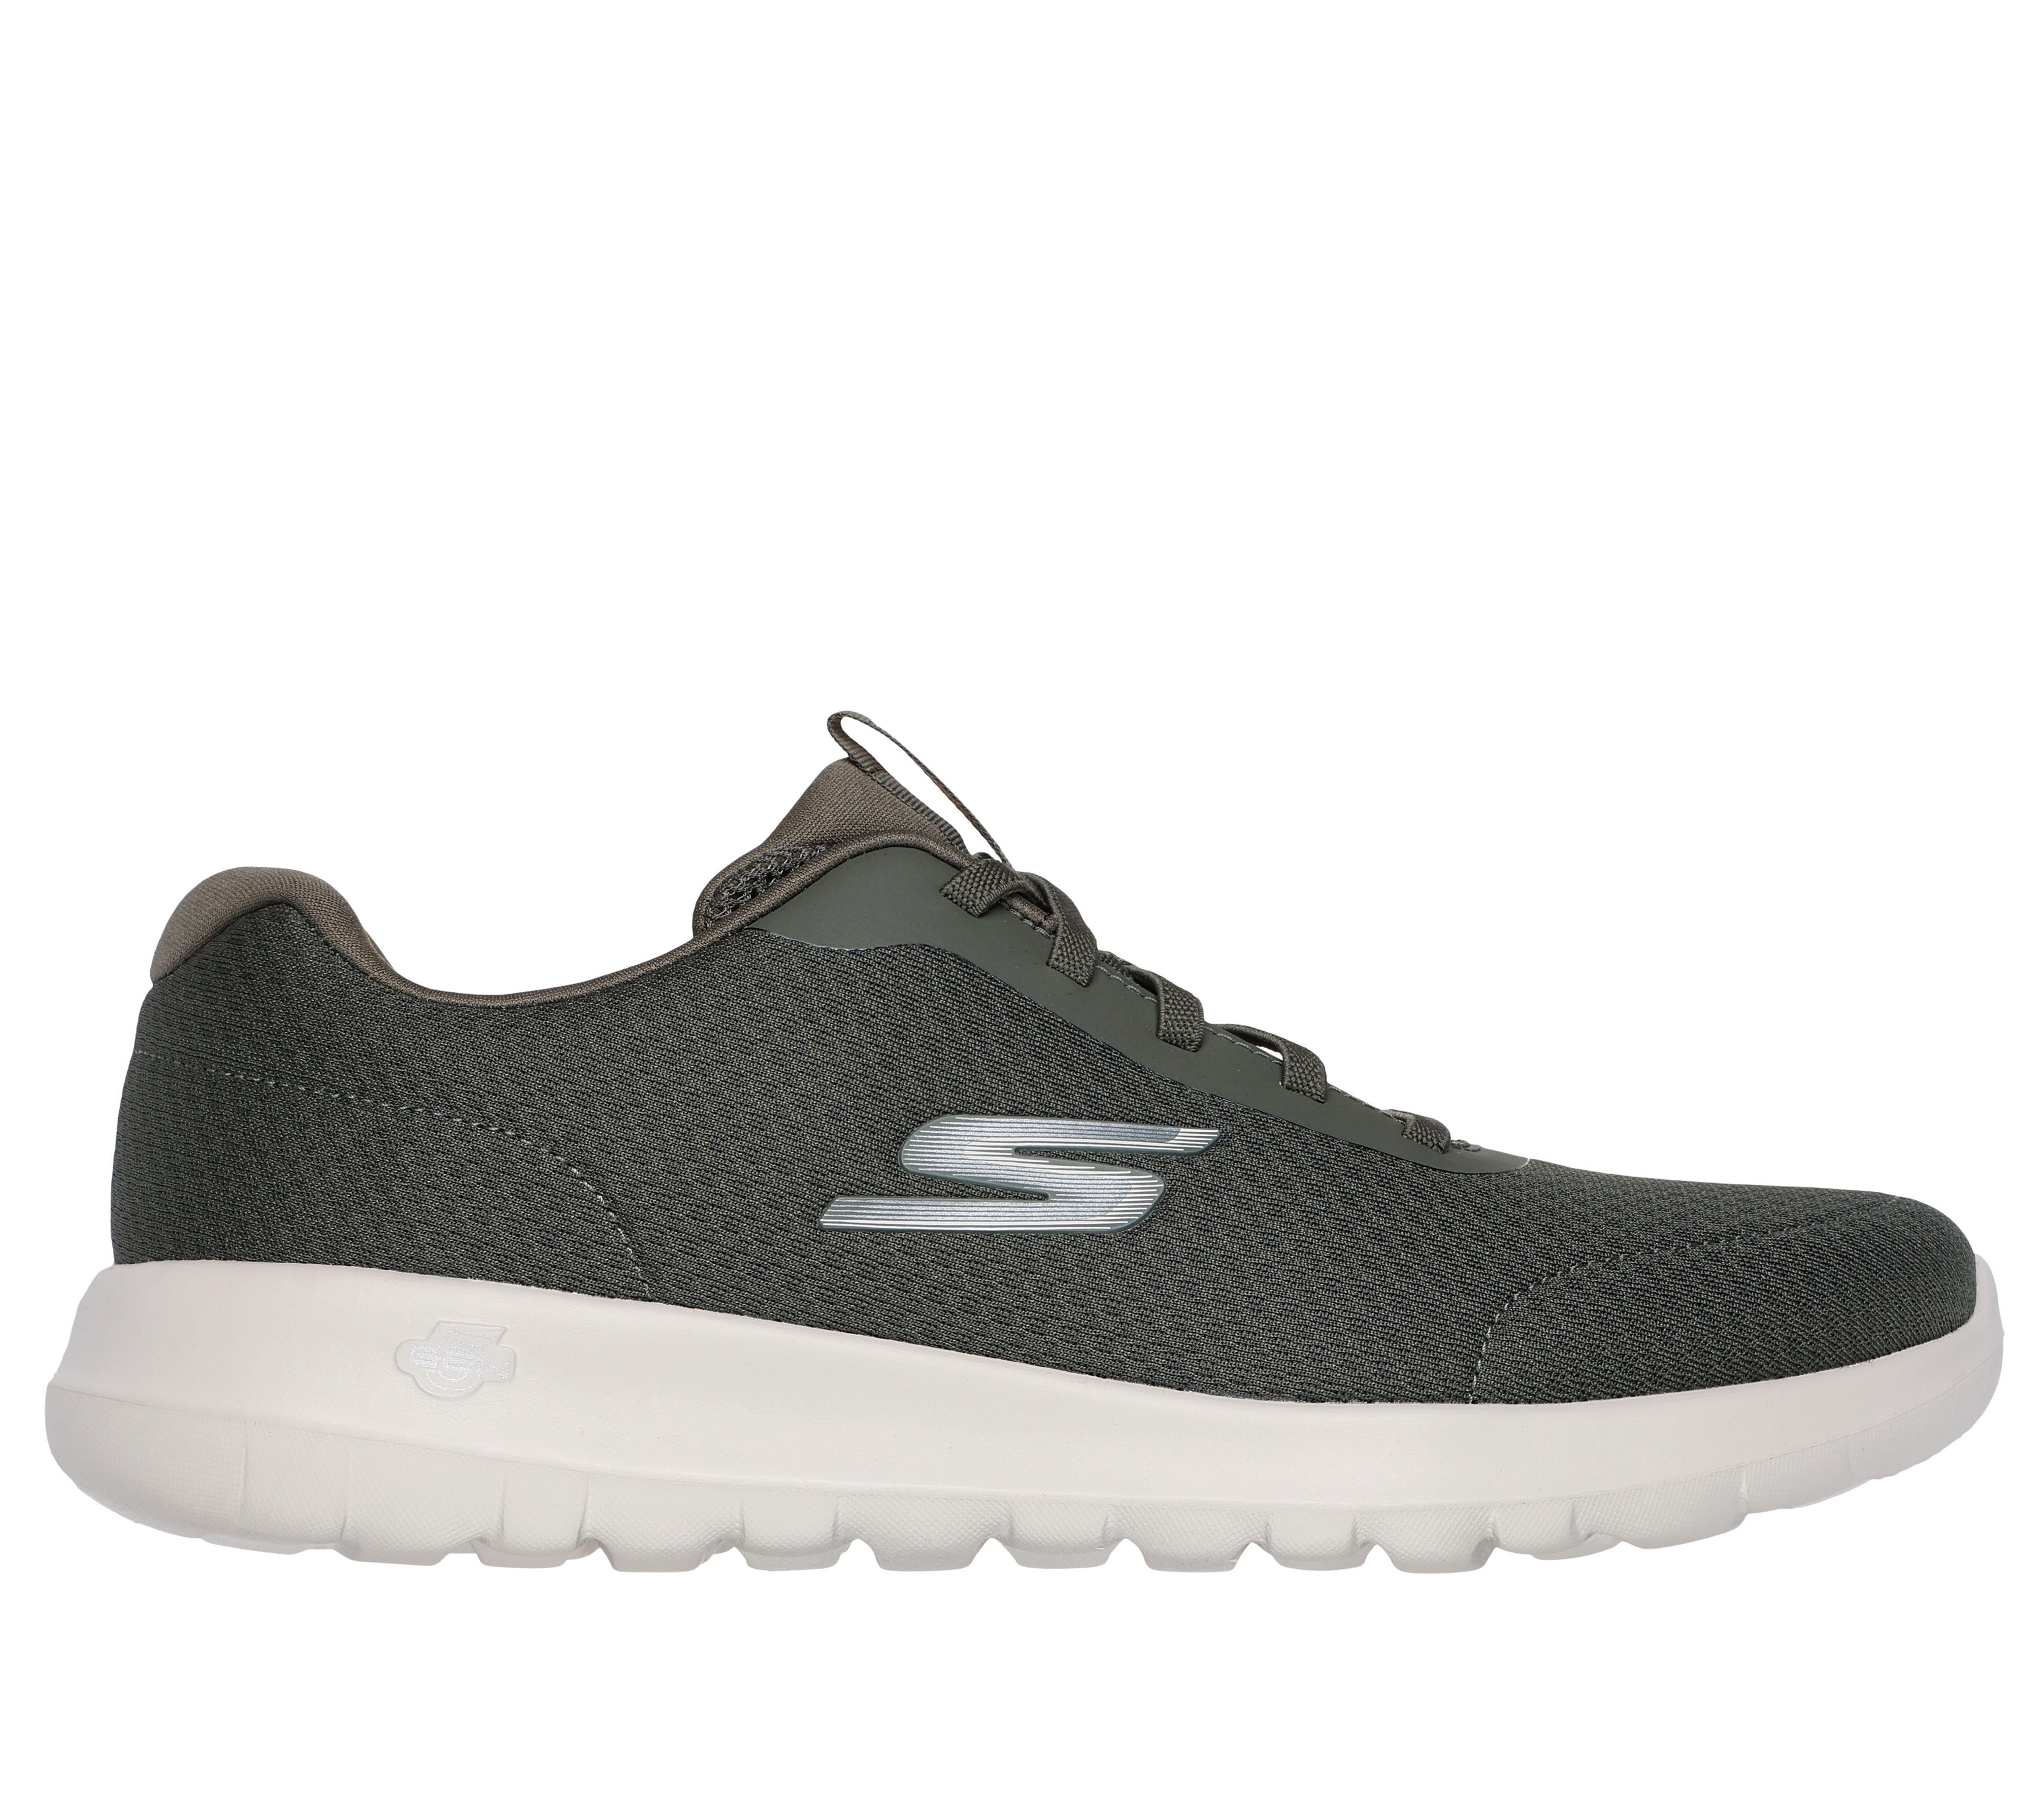 skechers go walk yoga mat - OFF-66% >Free Delivery